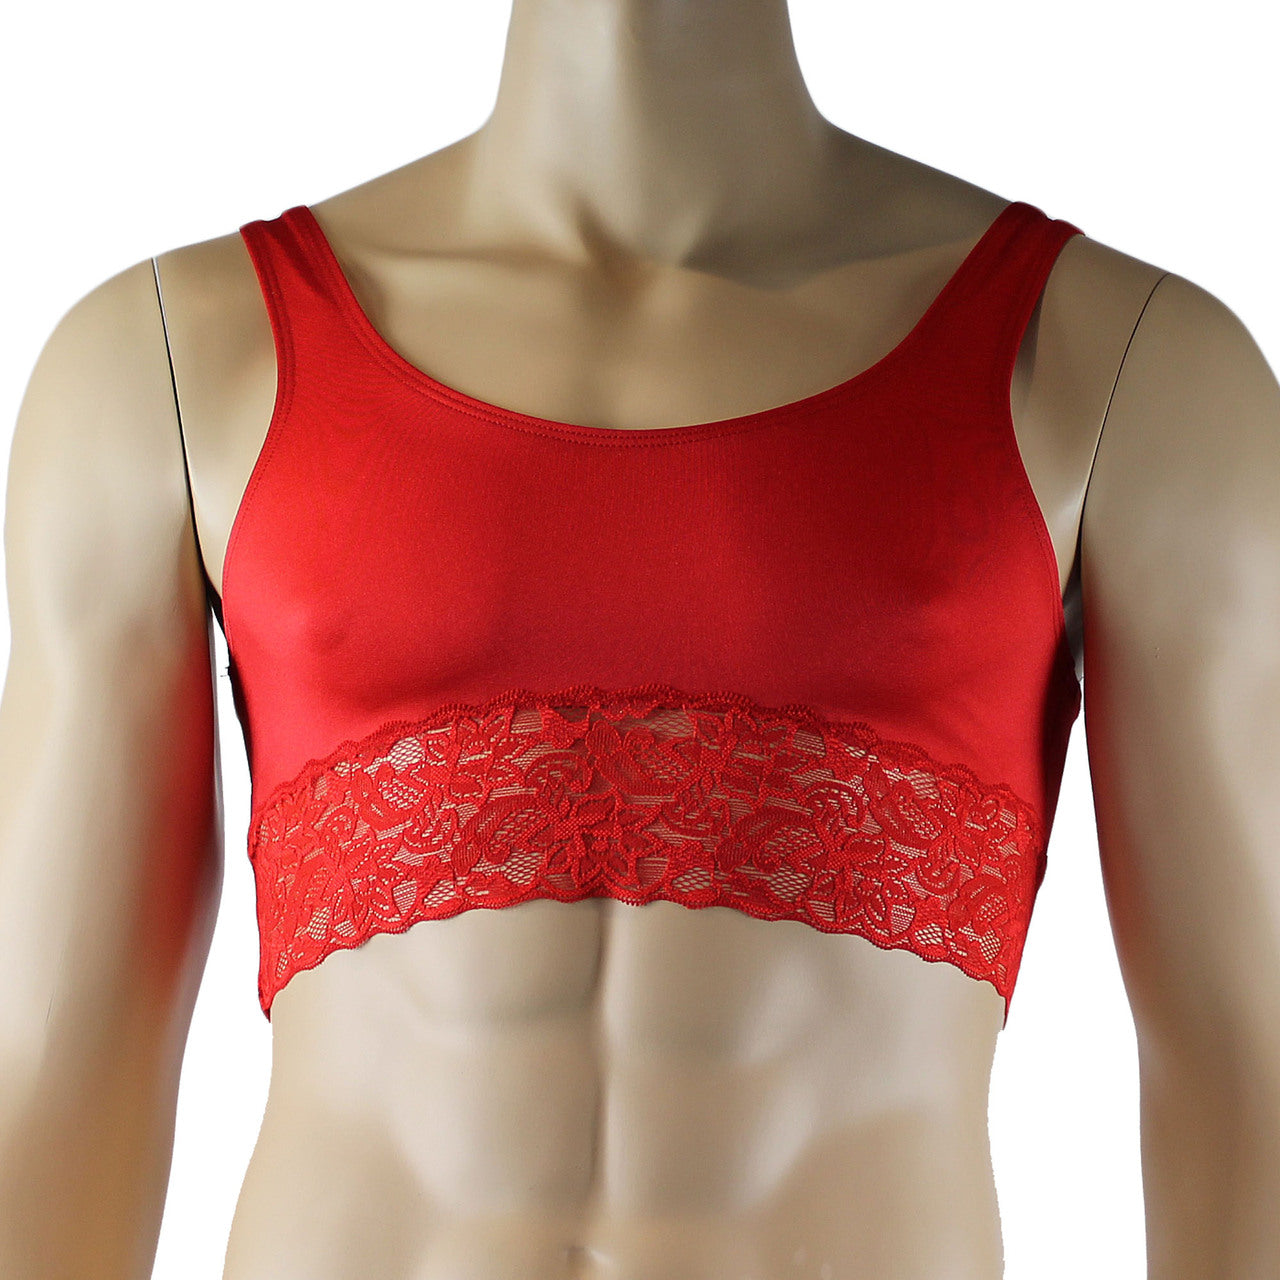 Male Lingerie Bra Camisole Top with Lace (red plus other colours)